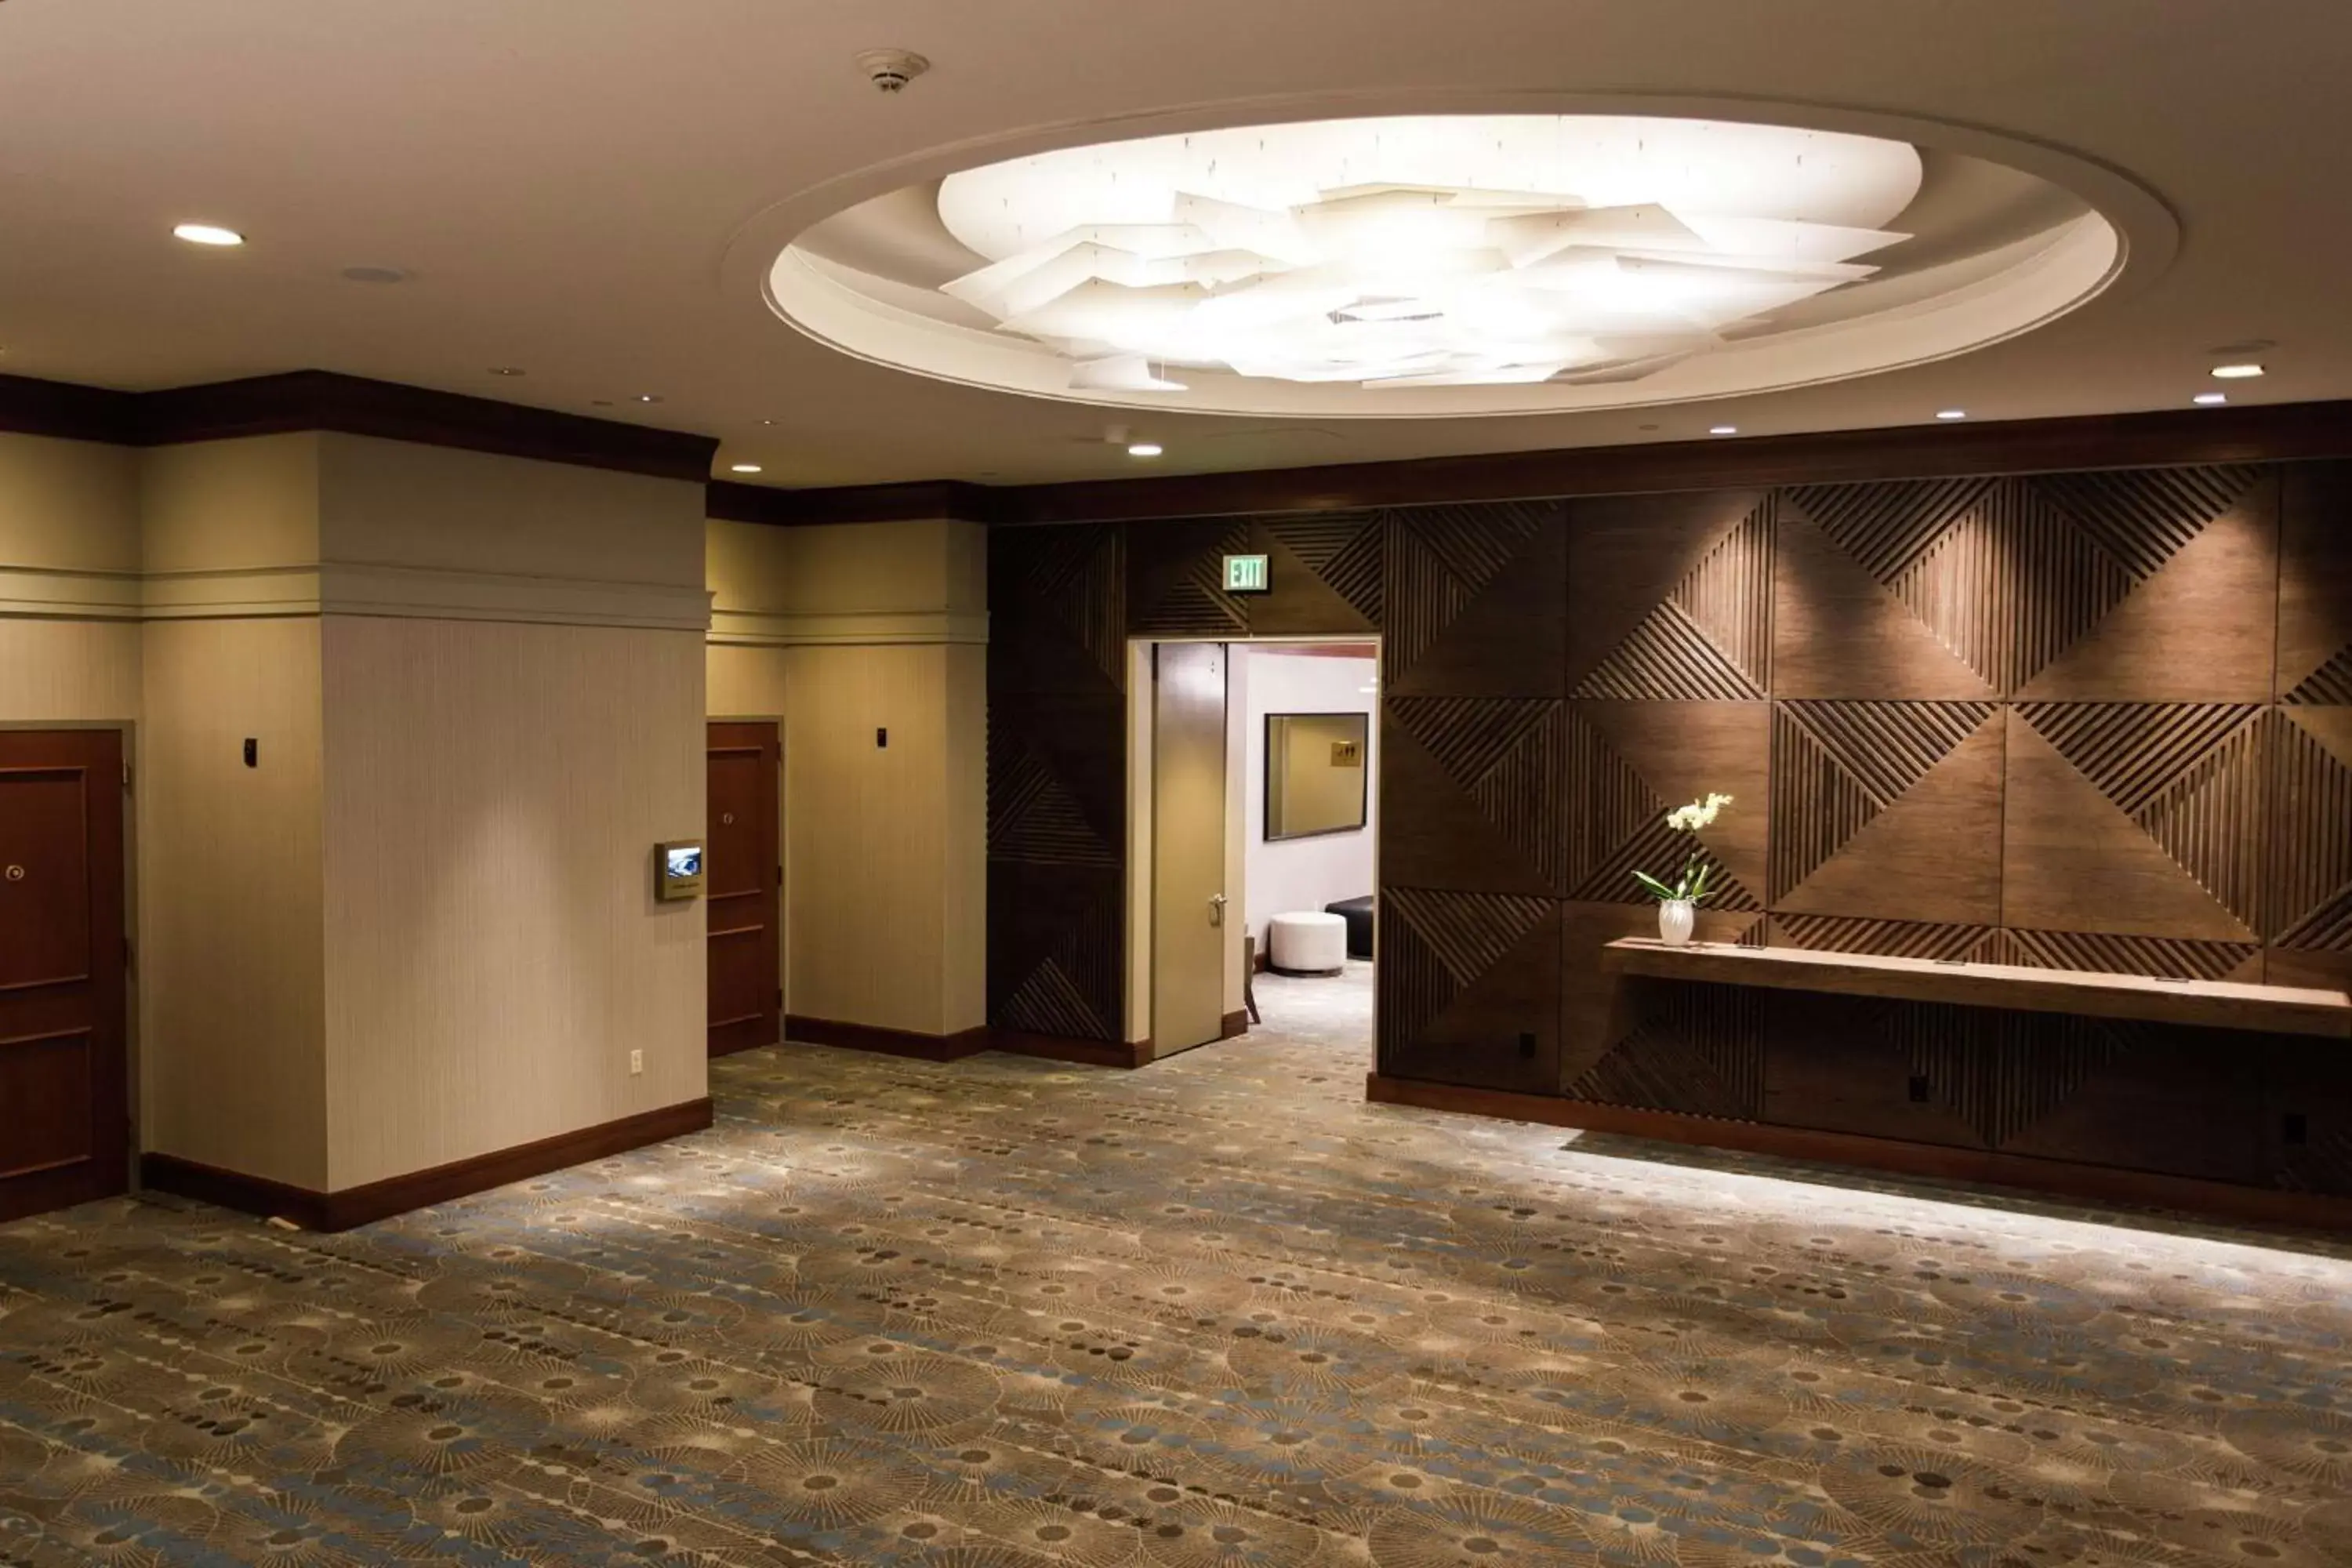 Meeting/conference room in The Duniway Portland, A Hilton Hotel